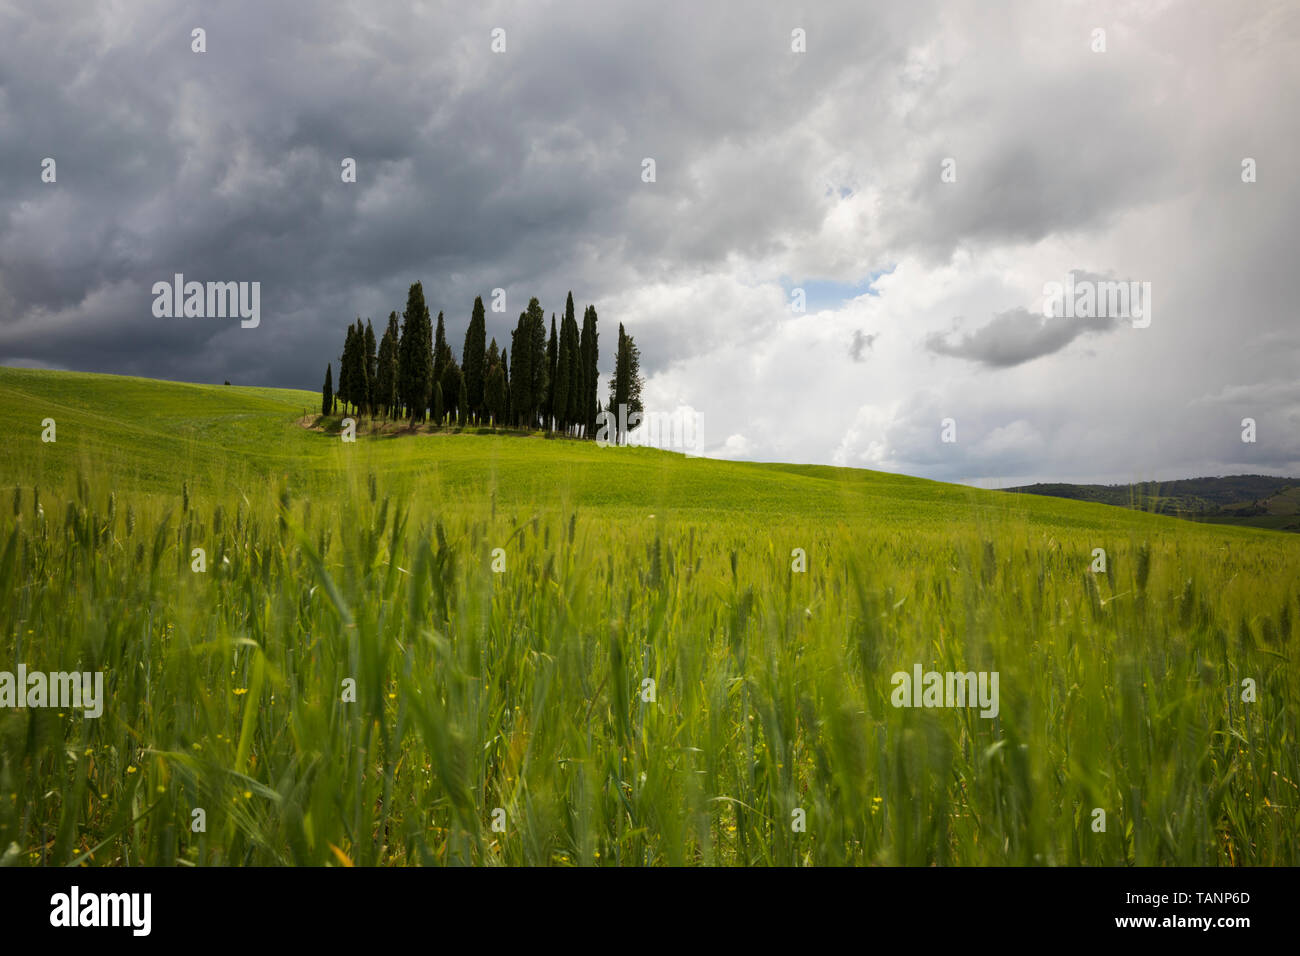 Clump of cypress trees in barley field under a stormy grey sky, San Quirico d'Orcia, Siena Province, Tuscany, Italy, Europe Stock Photo